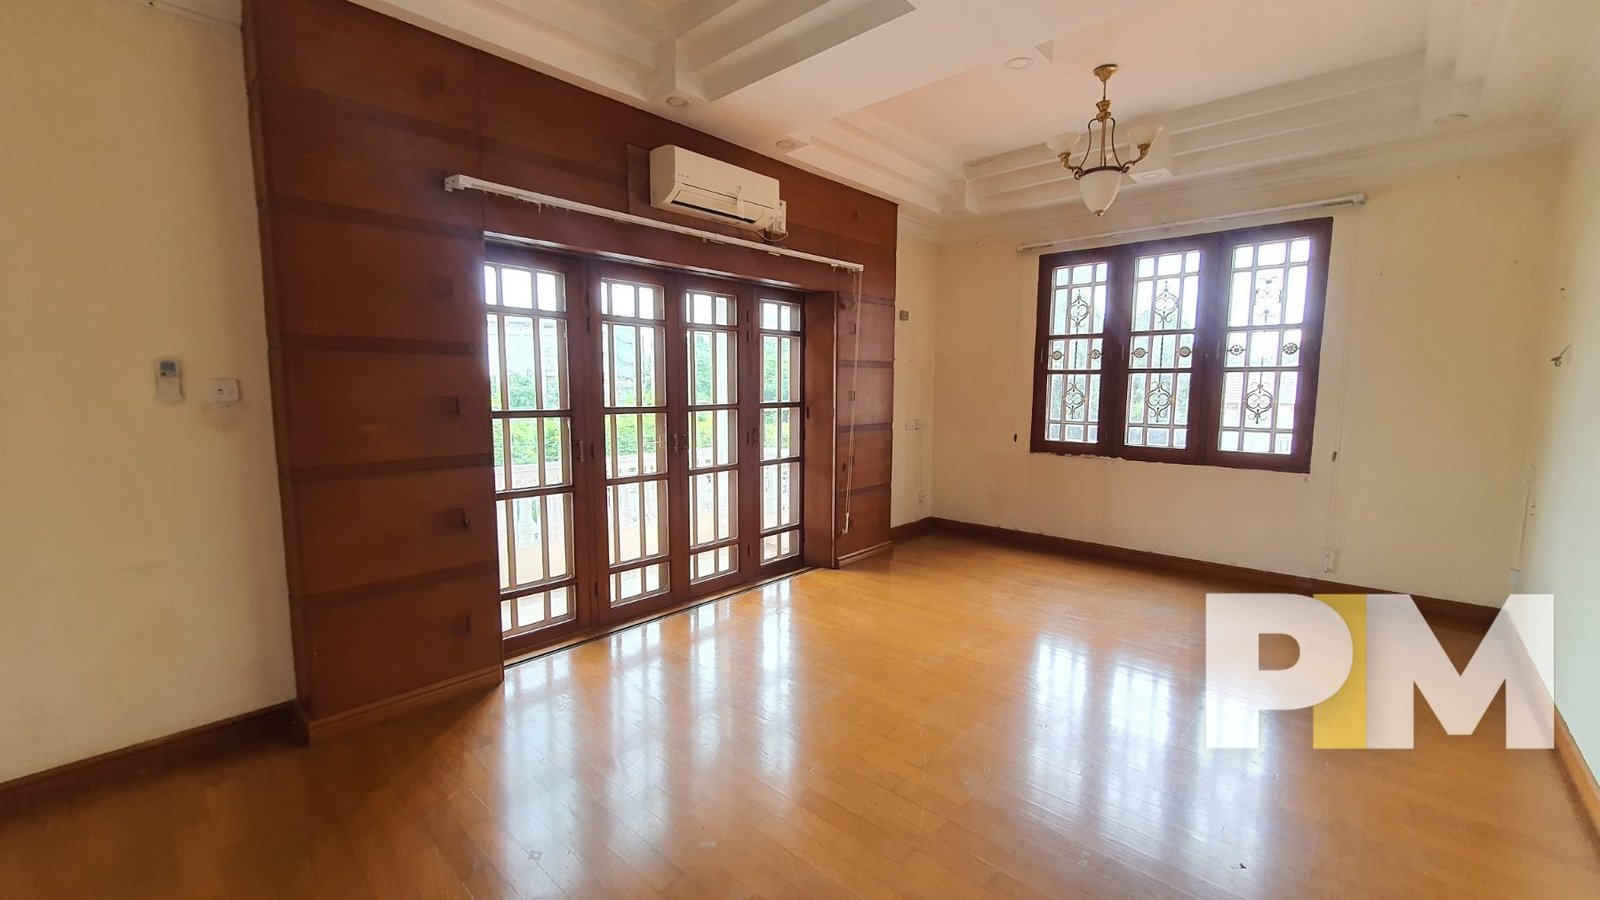 room with chandelier - real estate in yangon